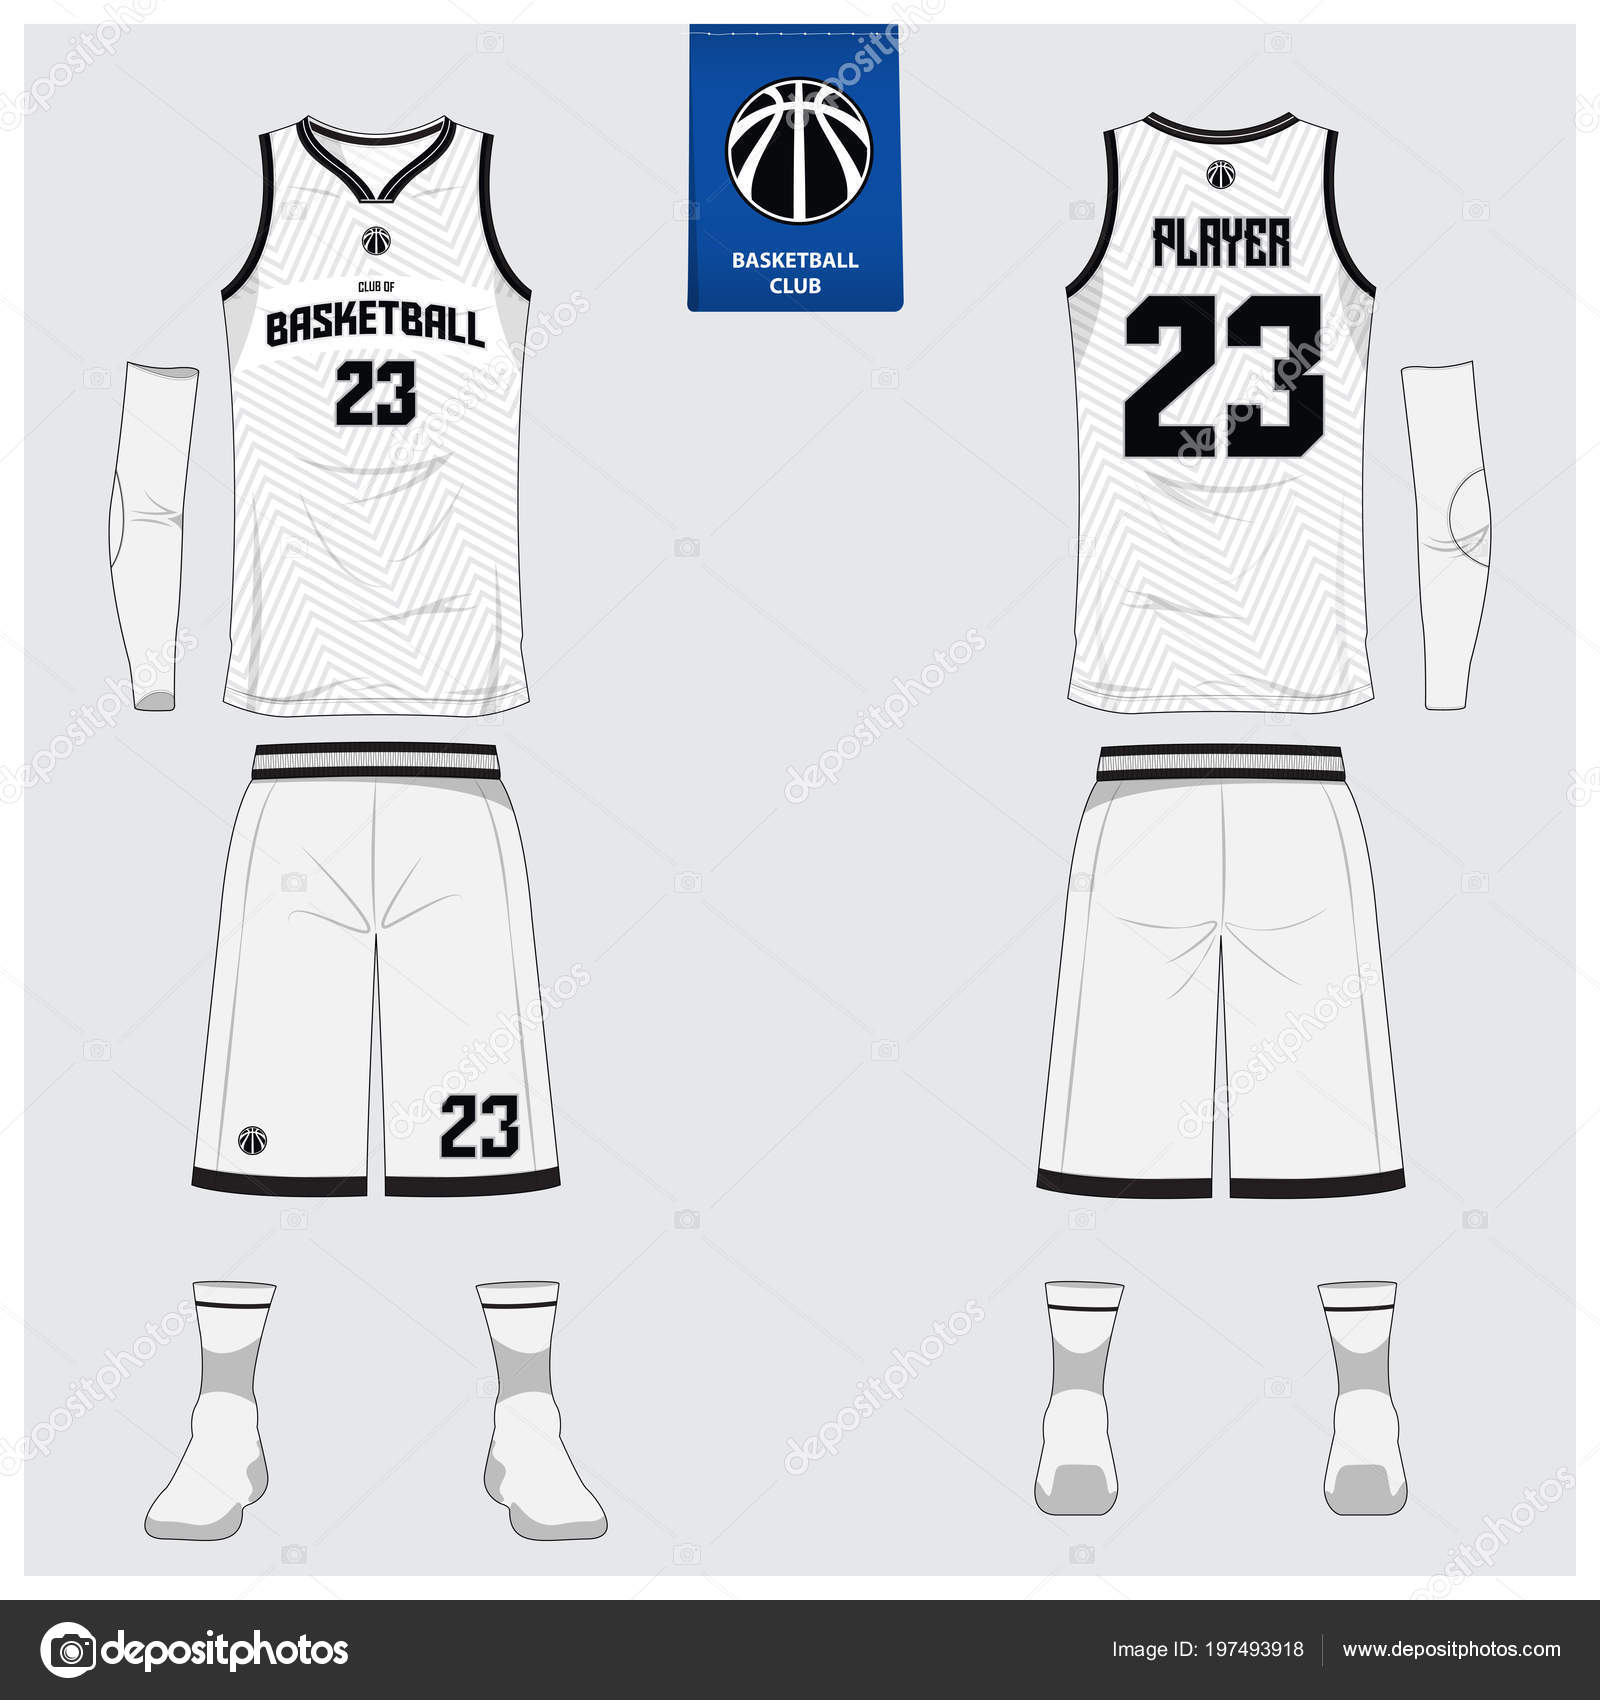 11,11 Basketball jersey template Vector Images - Free & Royalty Inside Blank Basketball Uniform Template